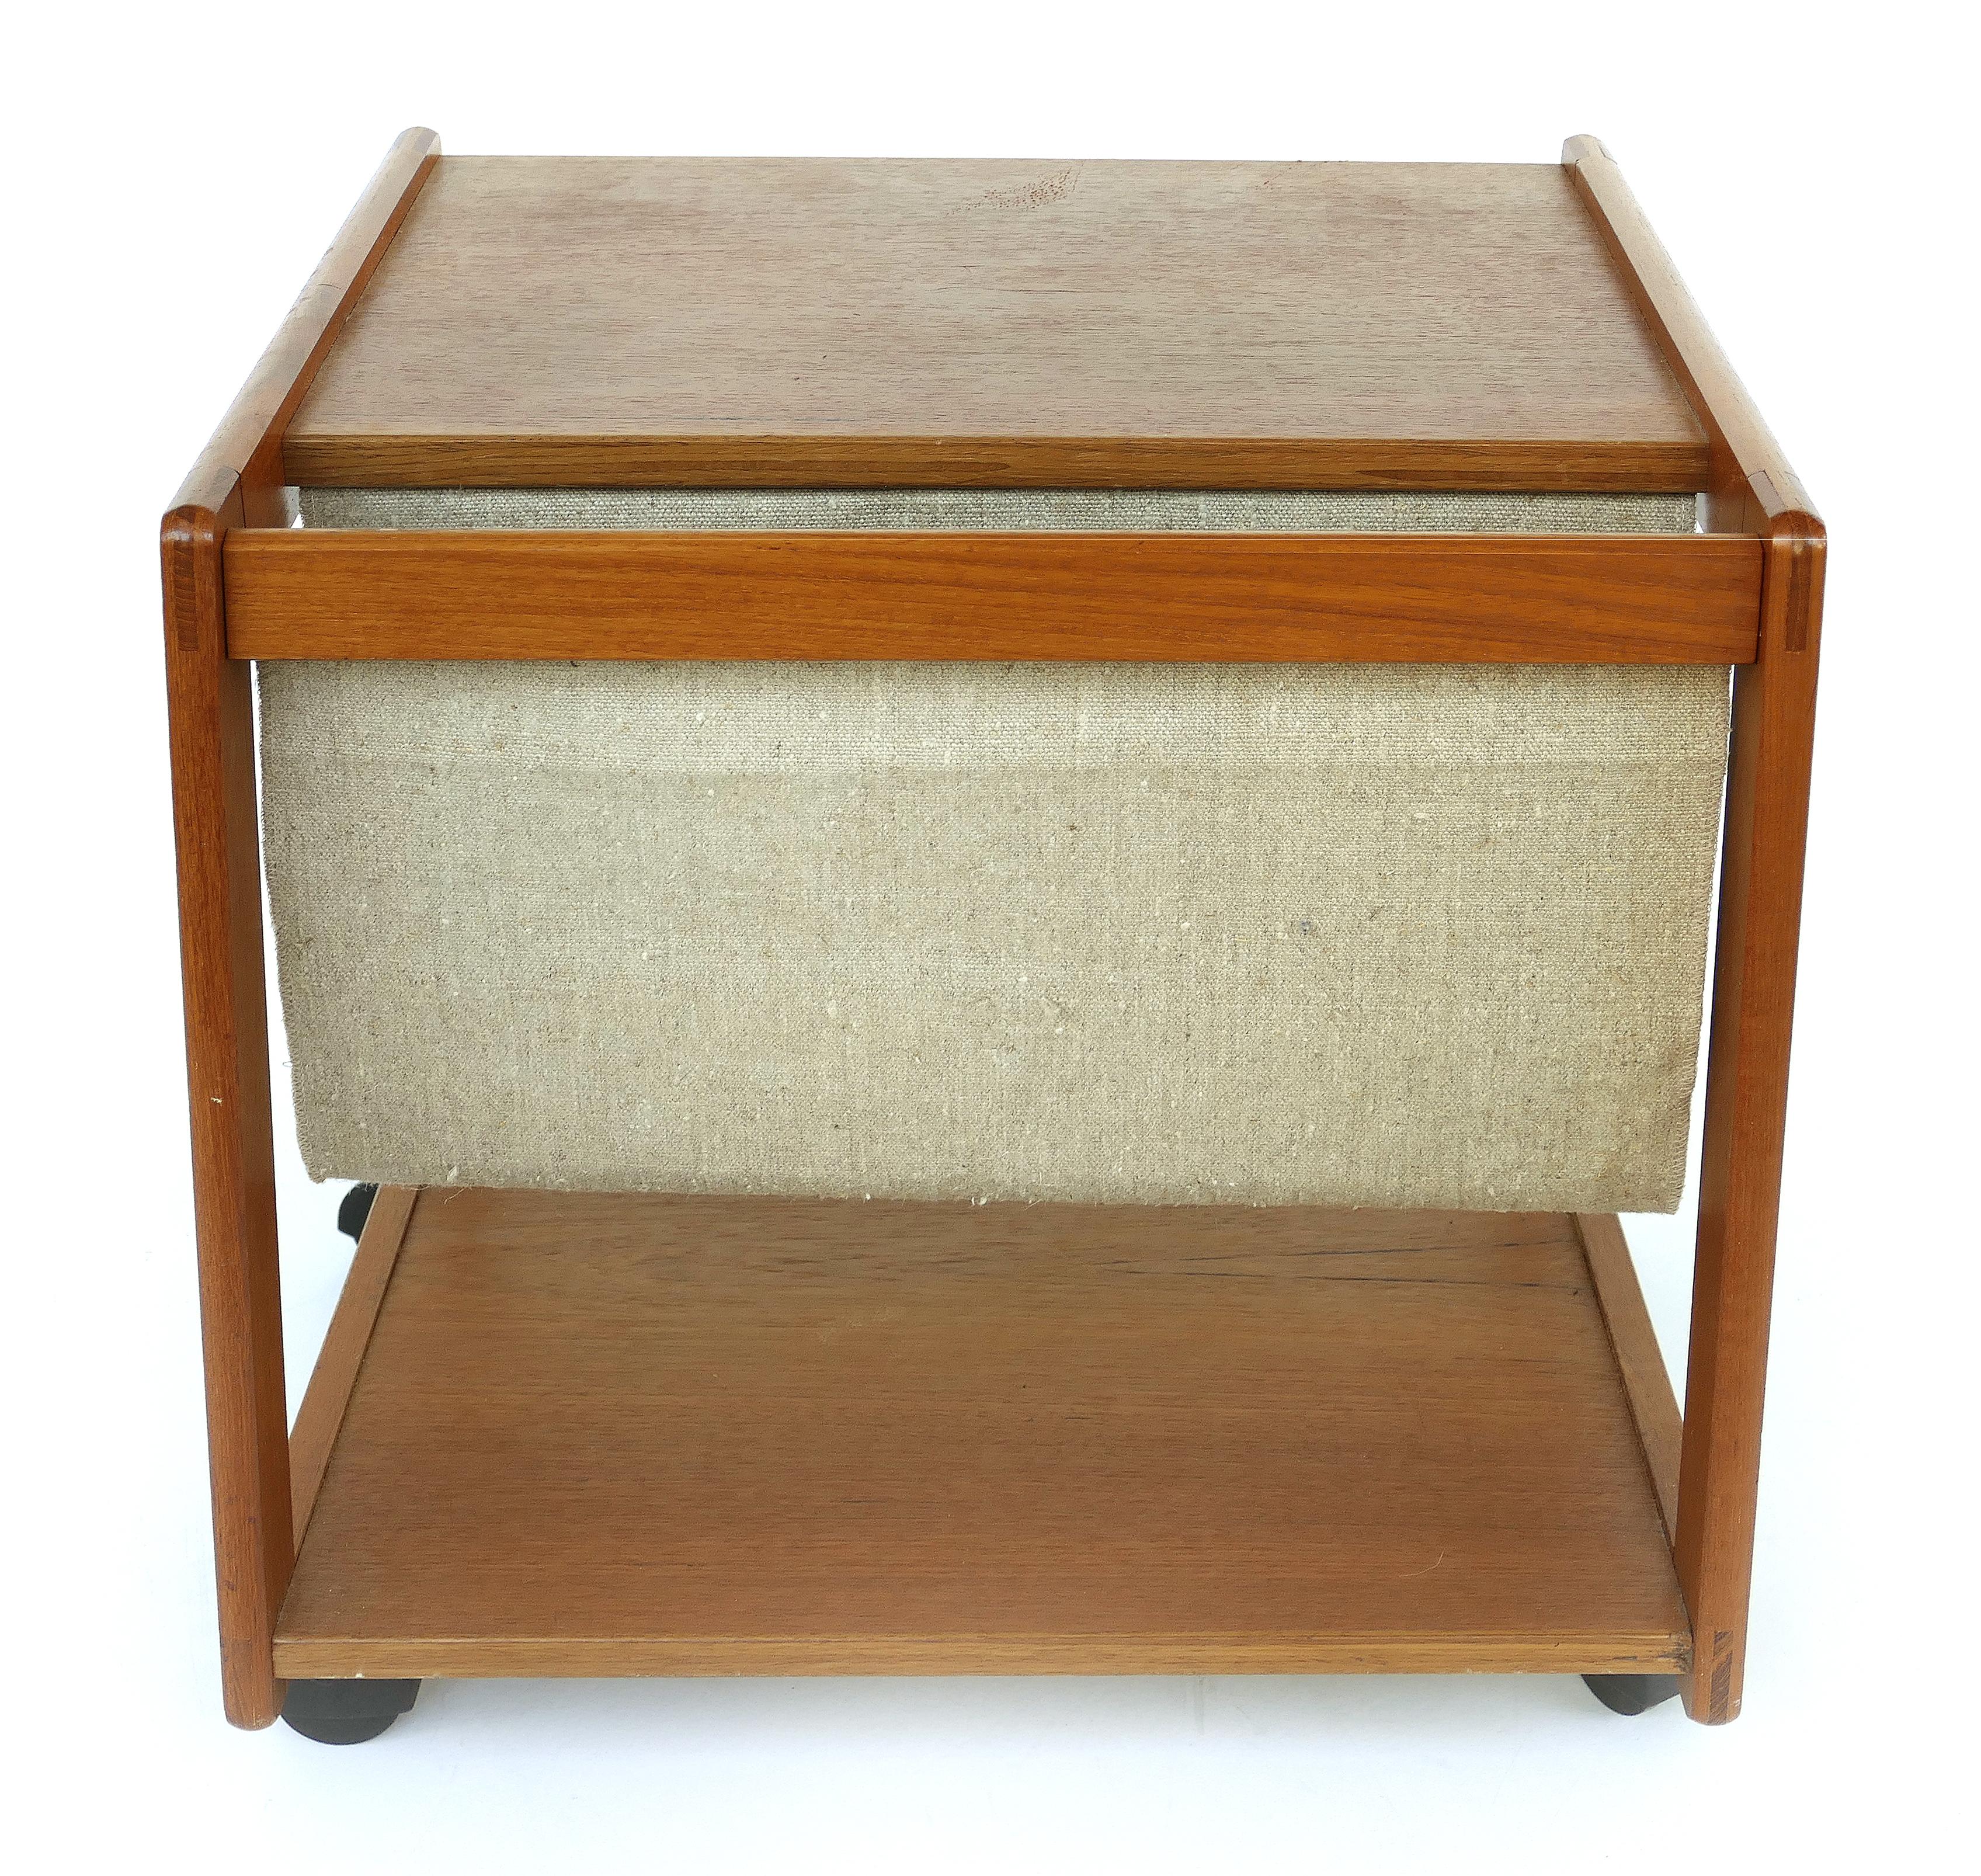 Danish modern teak magazine rack side table on casters from FBJ Møbler

Offered for sale is a Danish Mid-Century Modern teak magazine stand side table on casters by FBJ Møbler. The rolling stand has a linen magazine pouch on one end. It retains